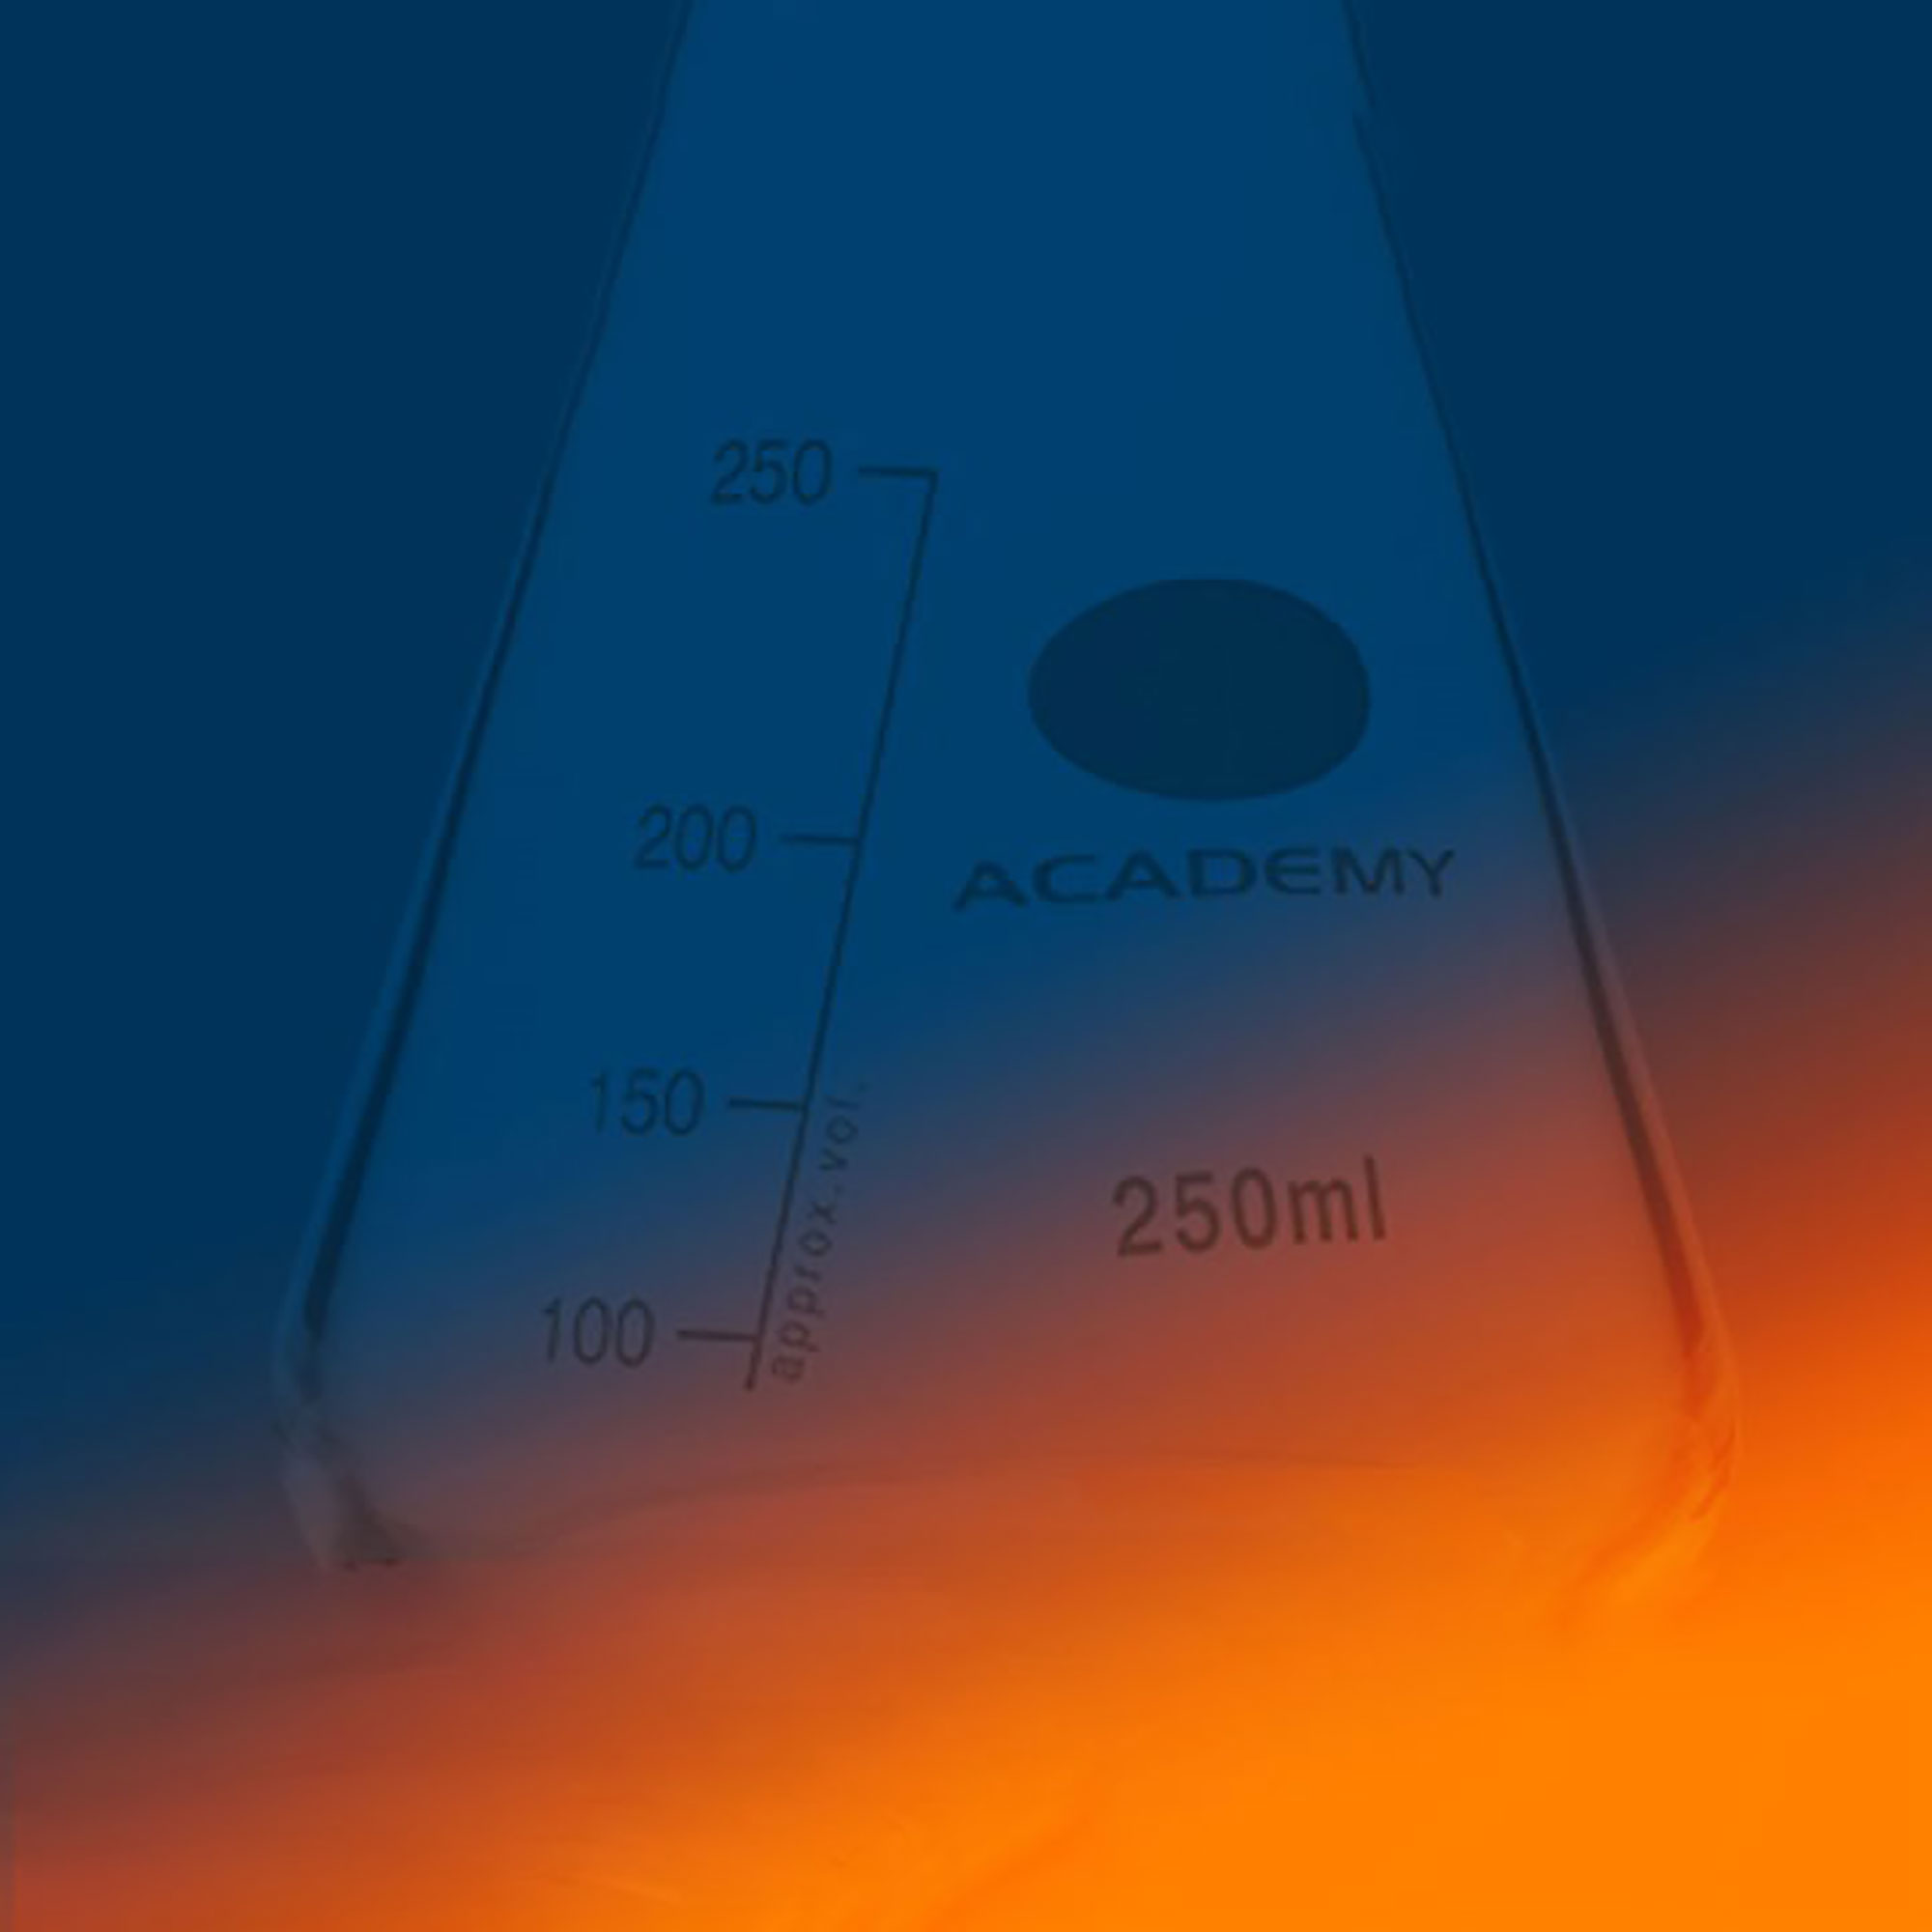 Academy Science